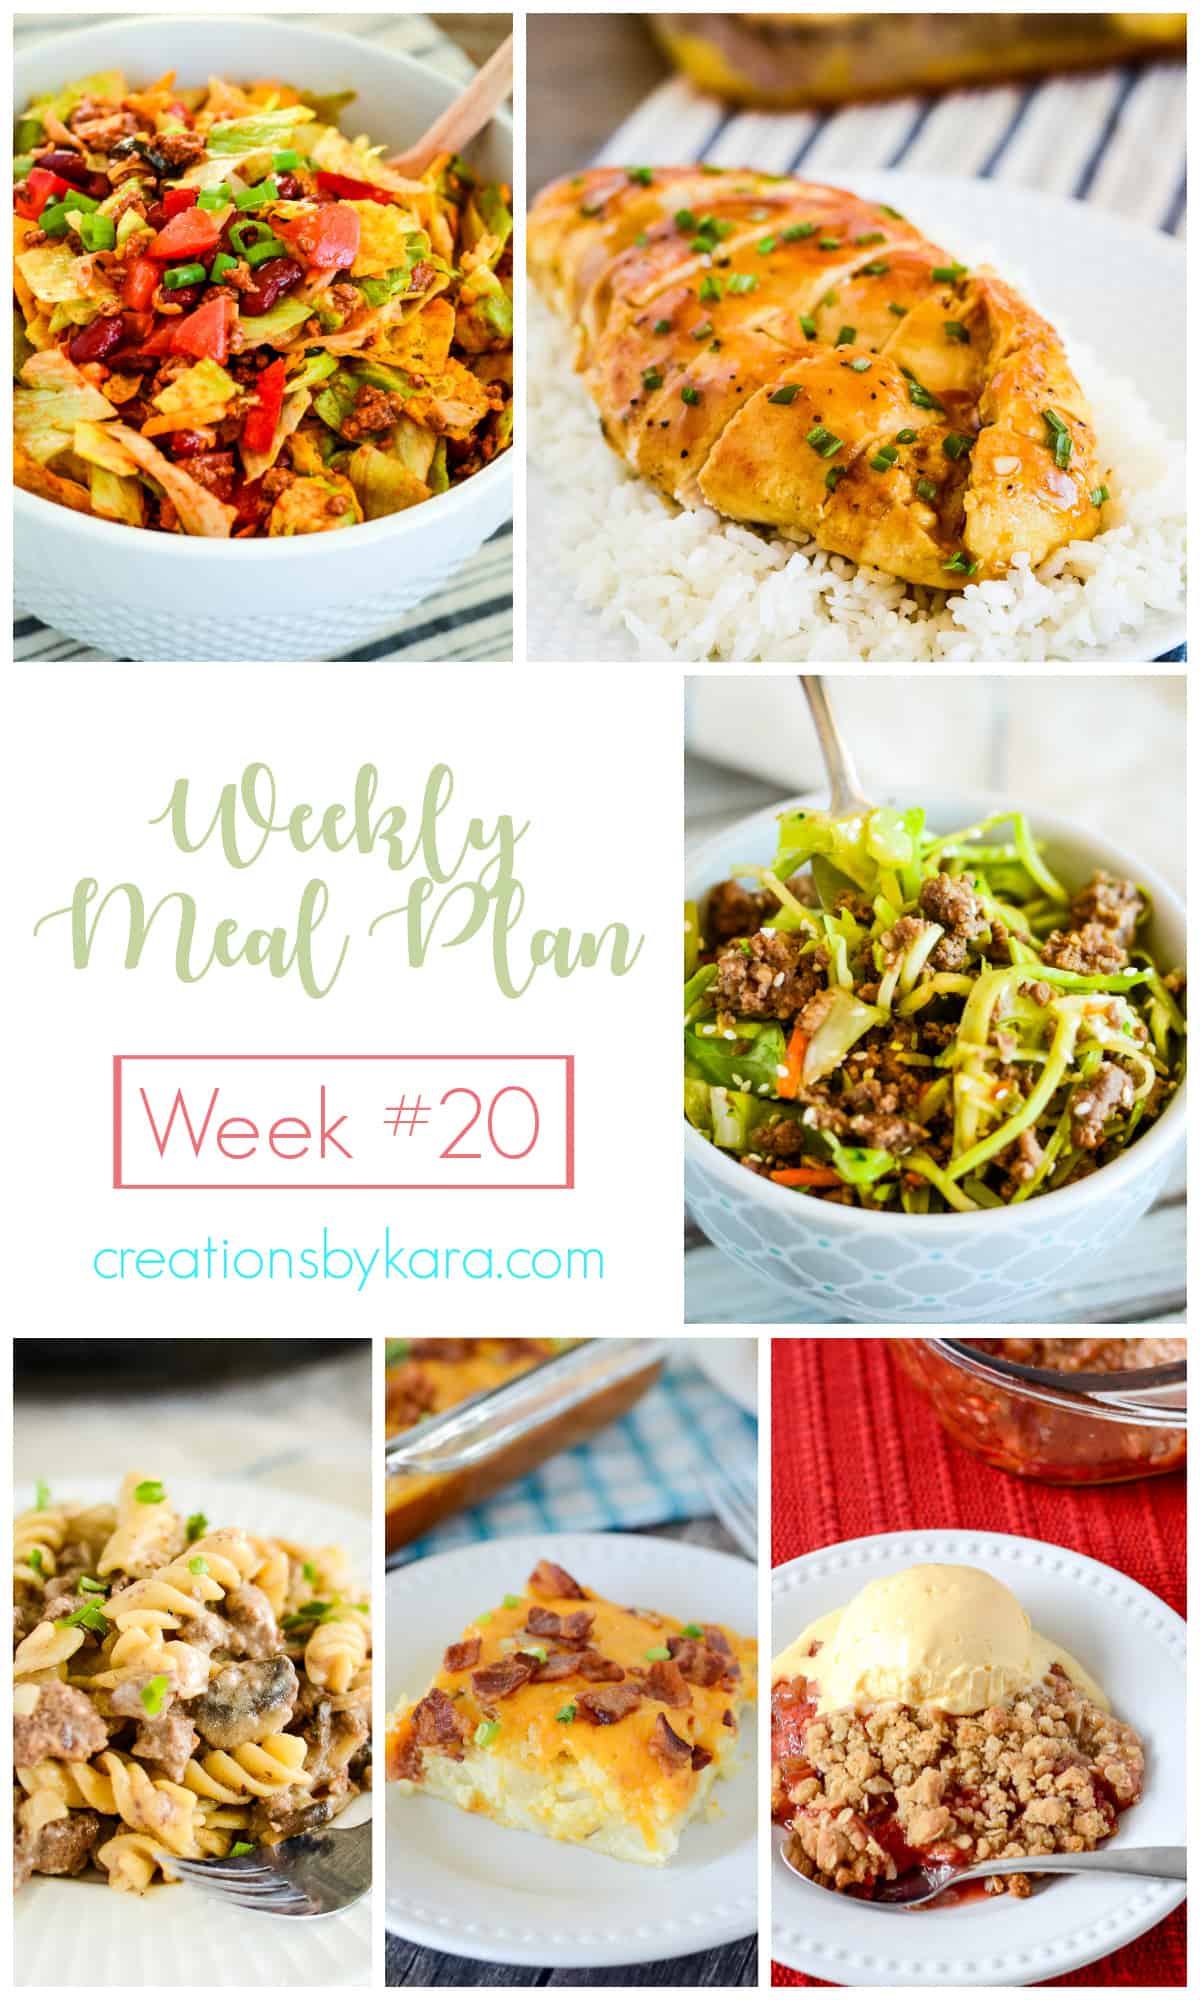  weekly meal plan #20 photo collage